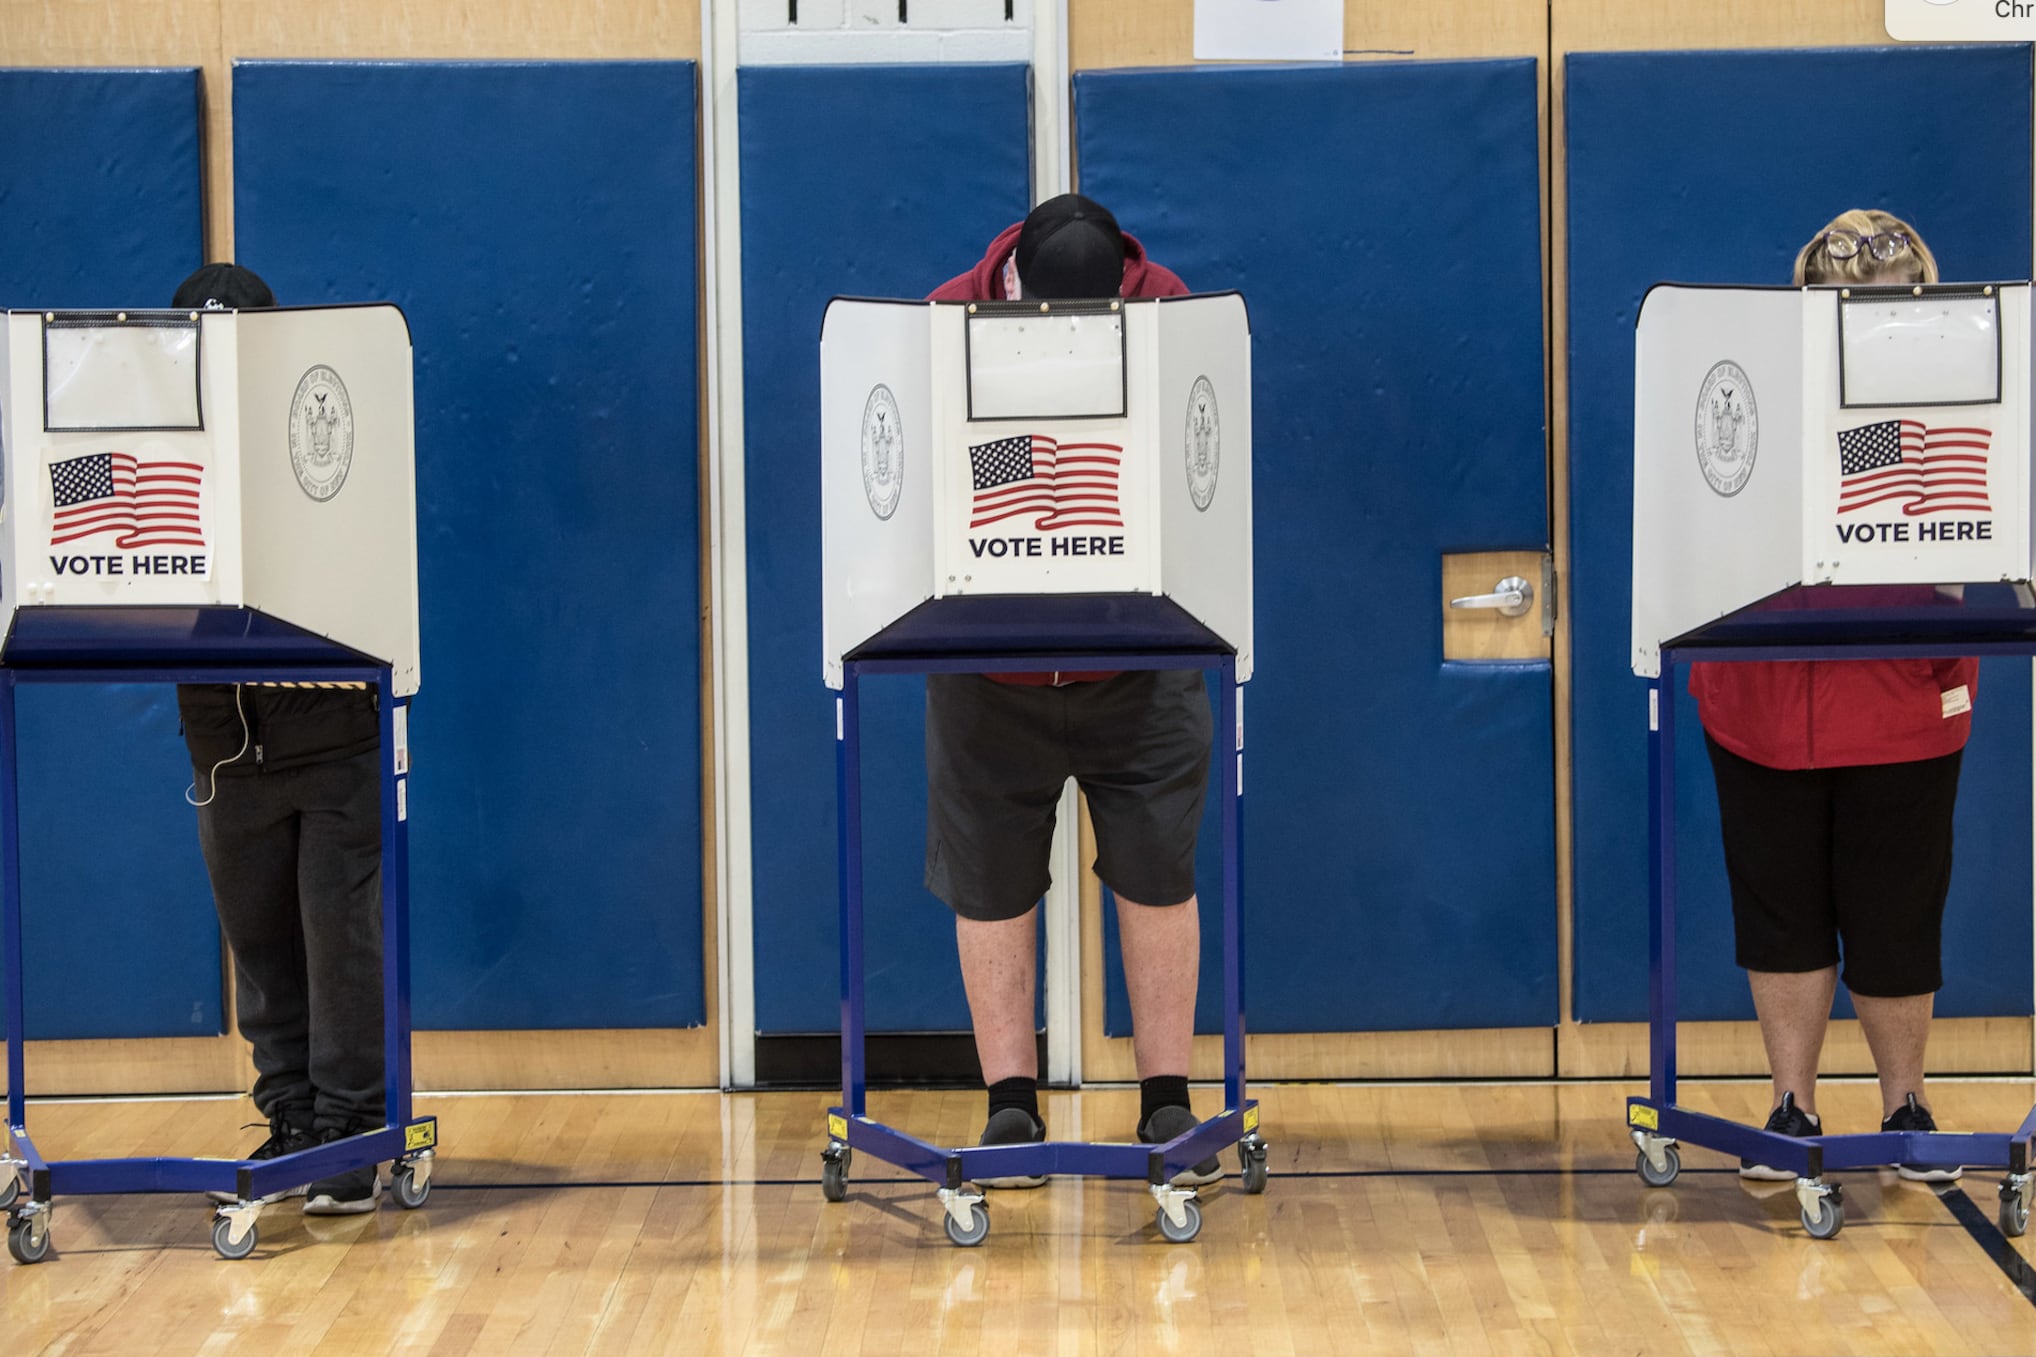 Three people stand behind voting partitions against a blue divider.